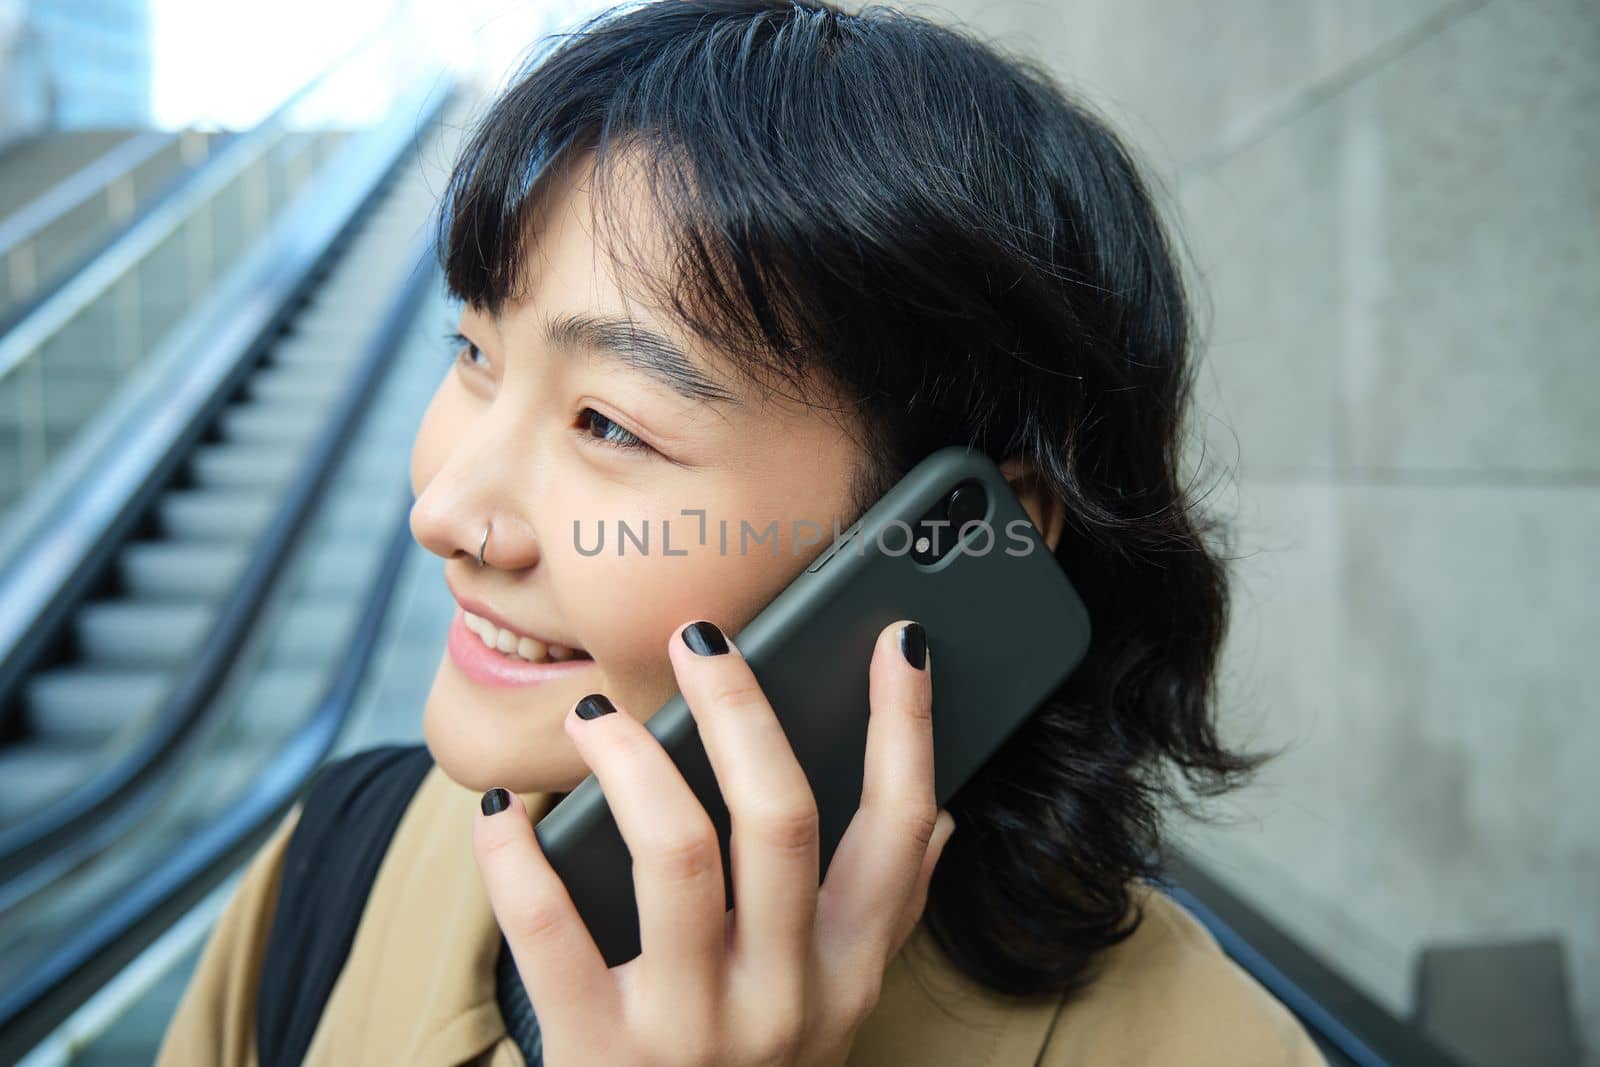 Headshot of smiling korean woman with smartphone, makes a phone call, goes down escalator in city, commutes to university.